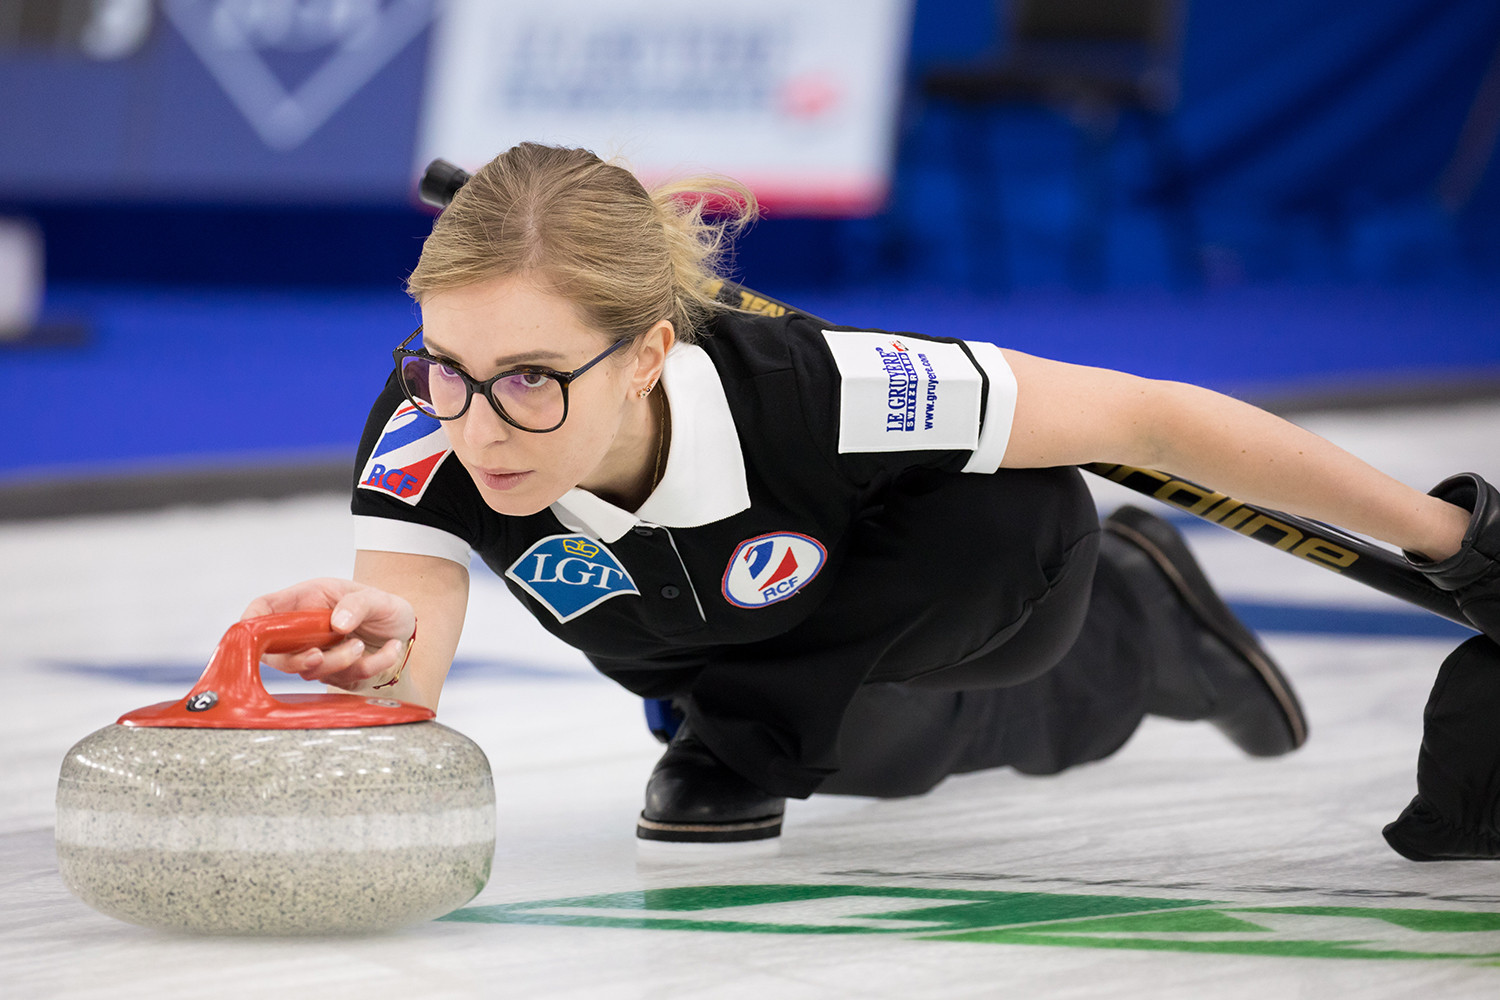 RCF go top of World Women's Curling Championship standings with win over Canada